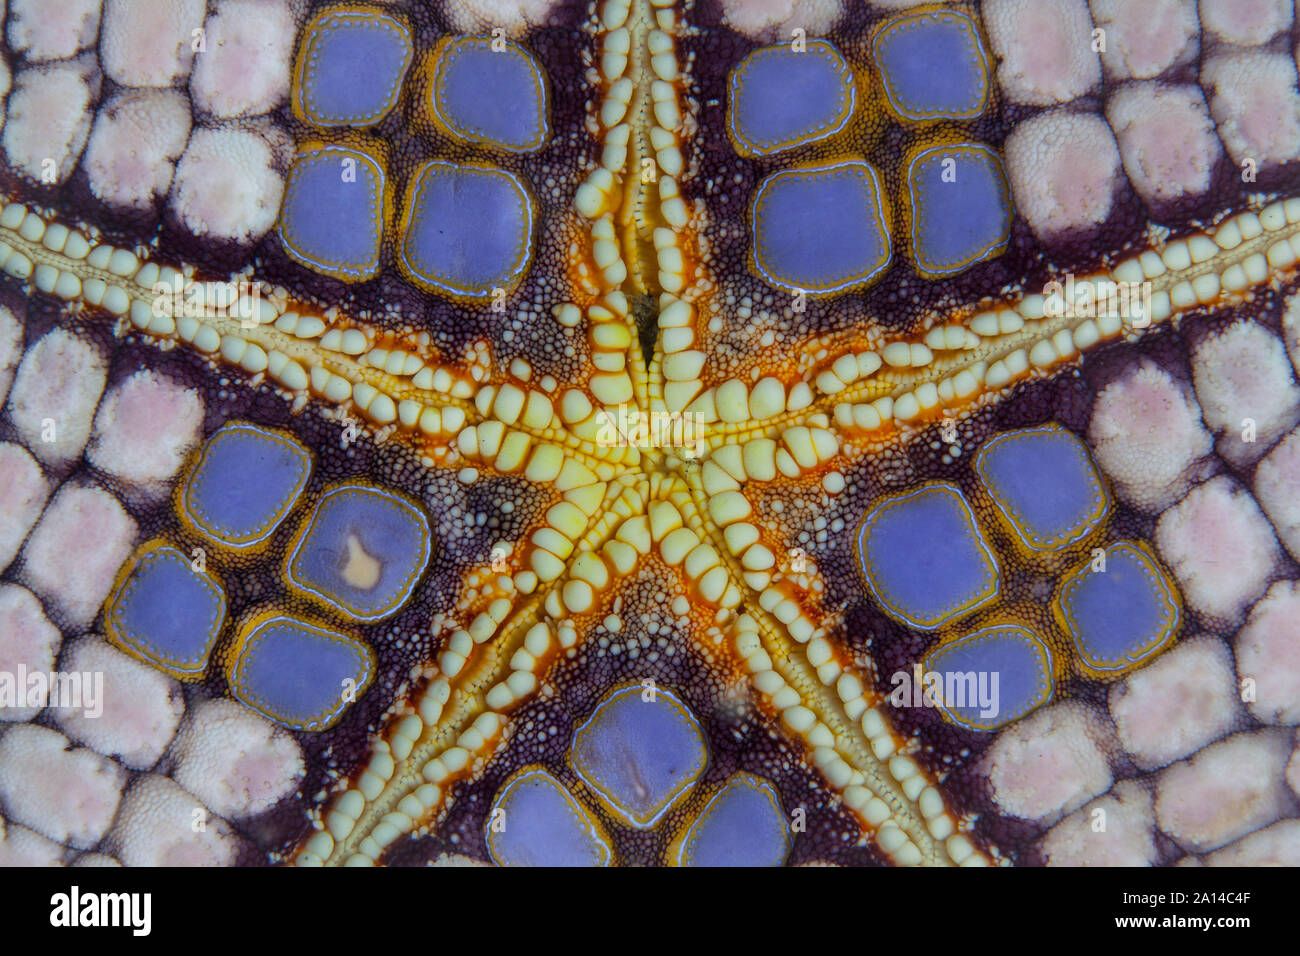 Detail of a pin cushion sea star in Lembeh Strait, Indonesia. Stock Photo